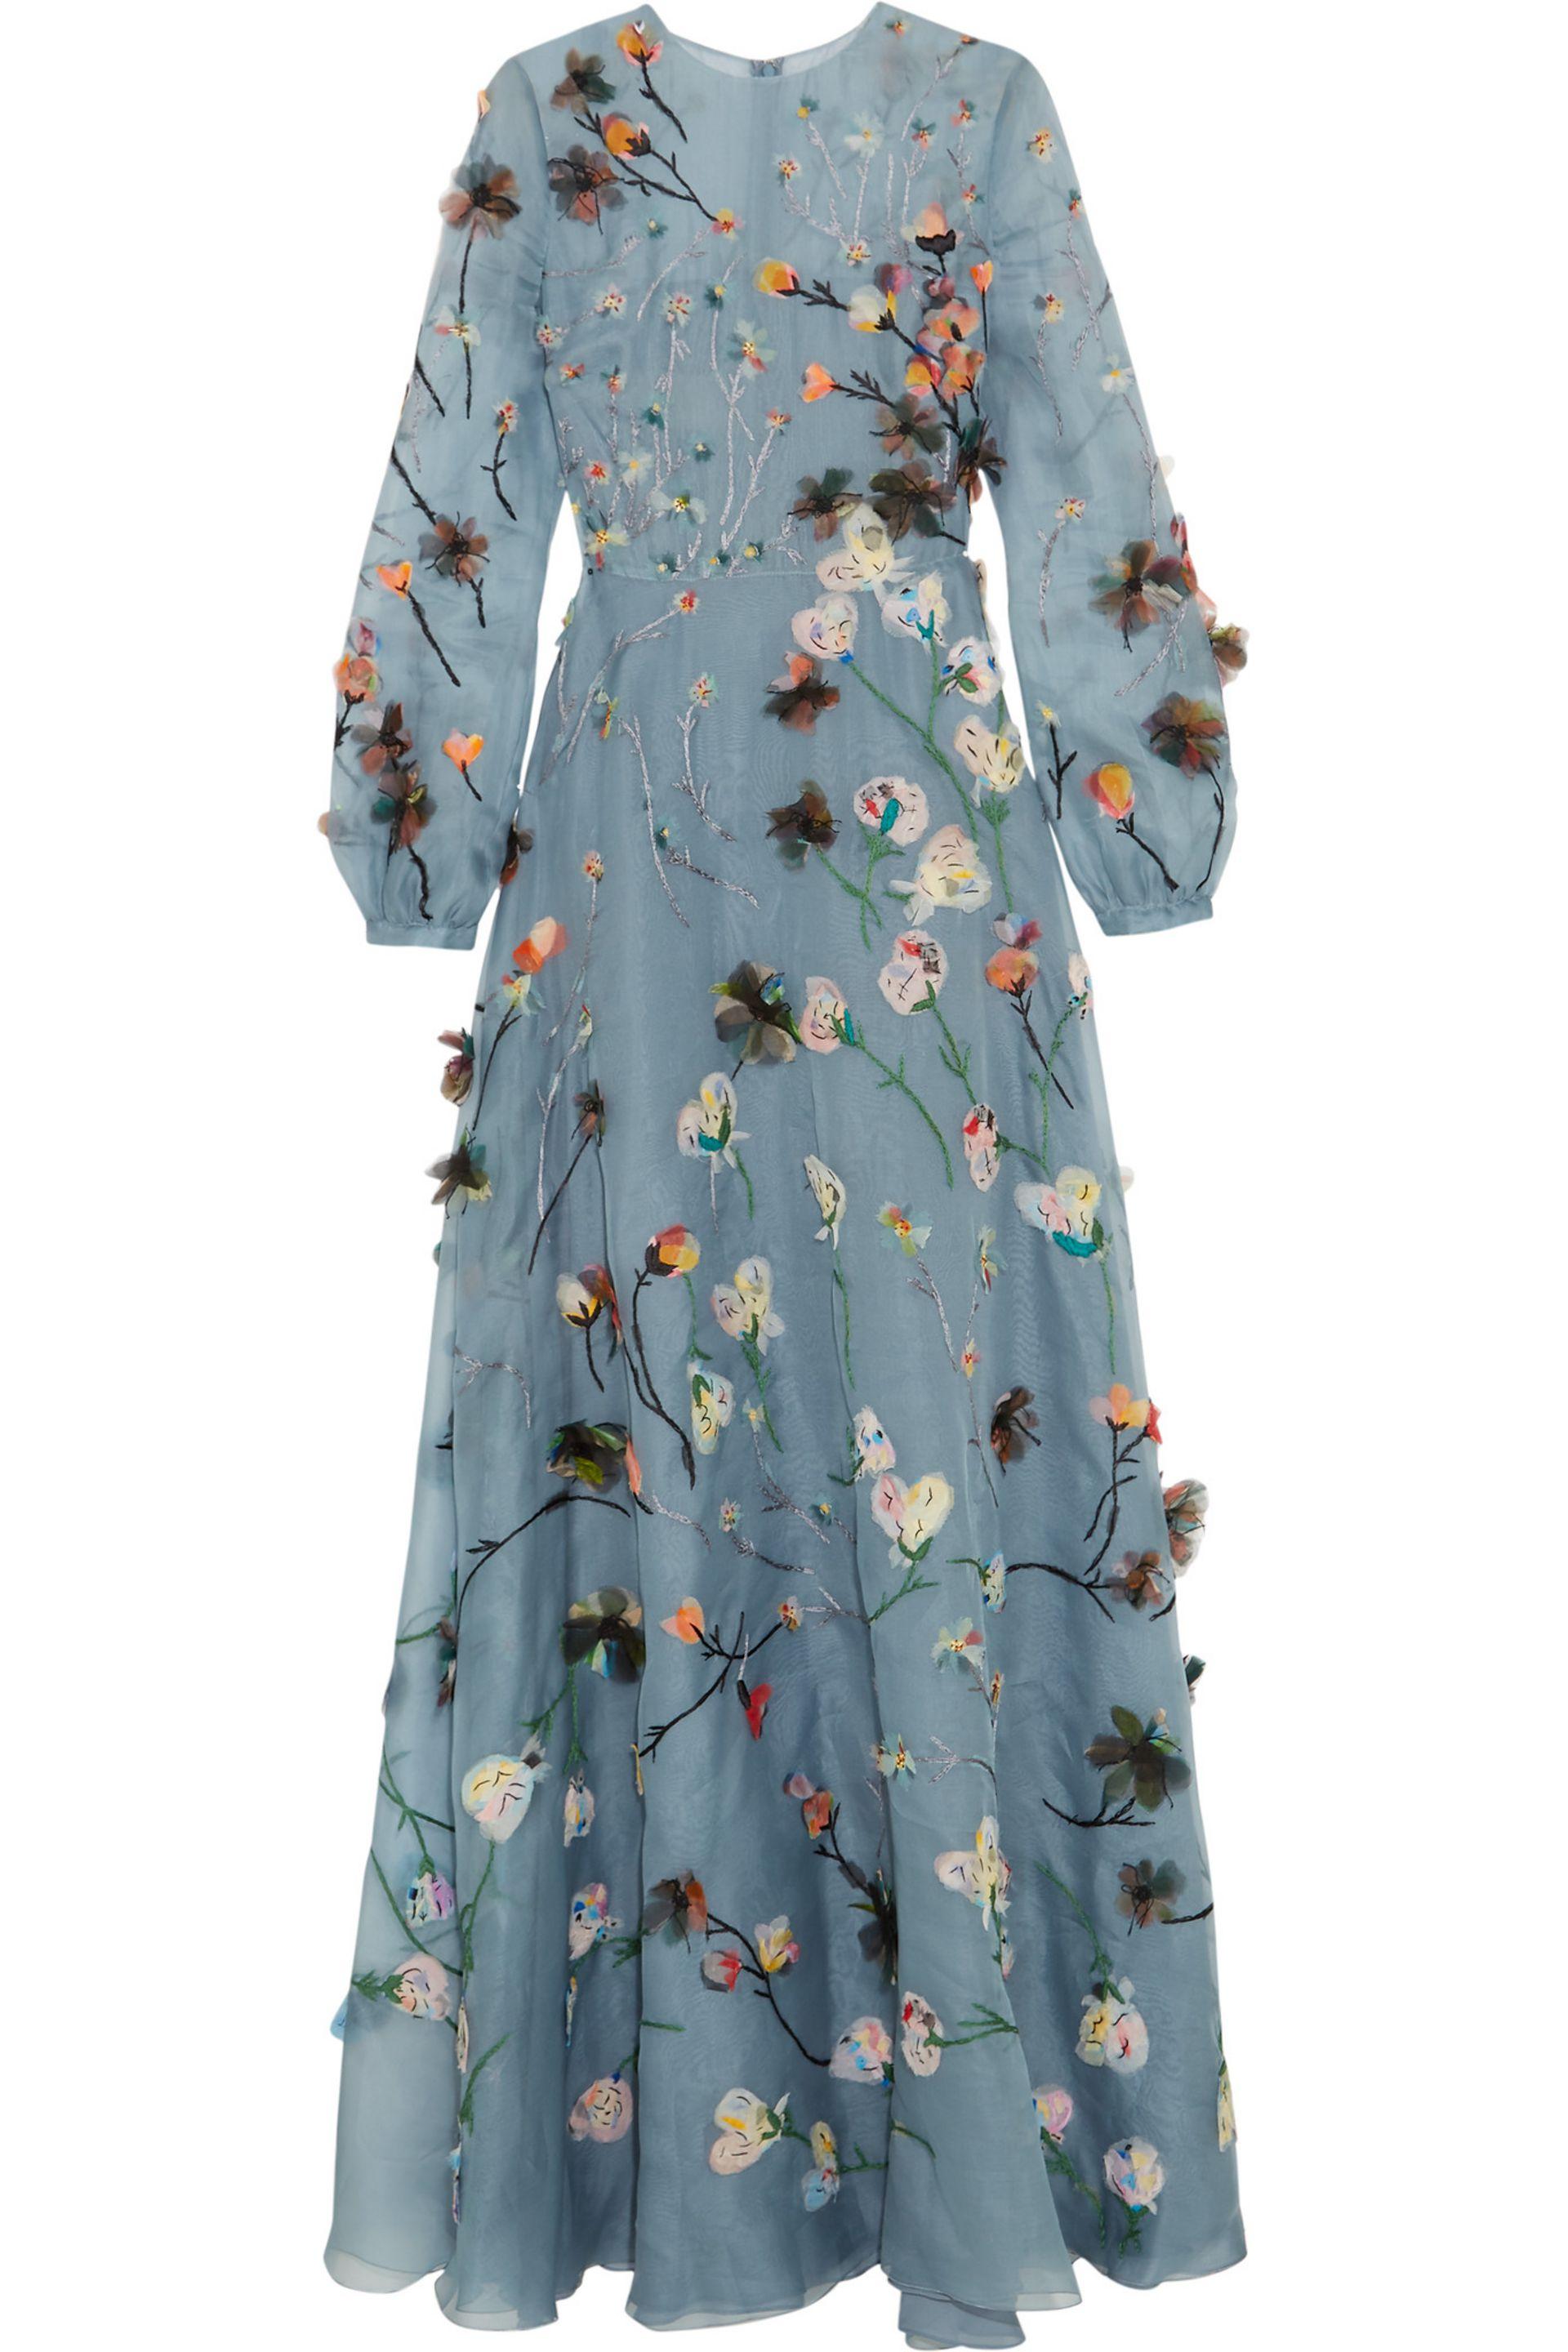 Valentino Floral Applique Evening Dress in Blue - Lyst